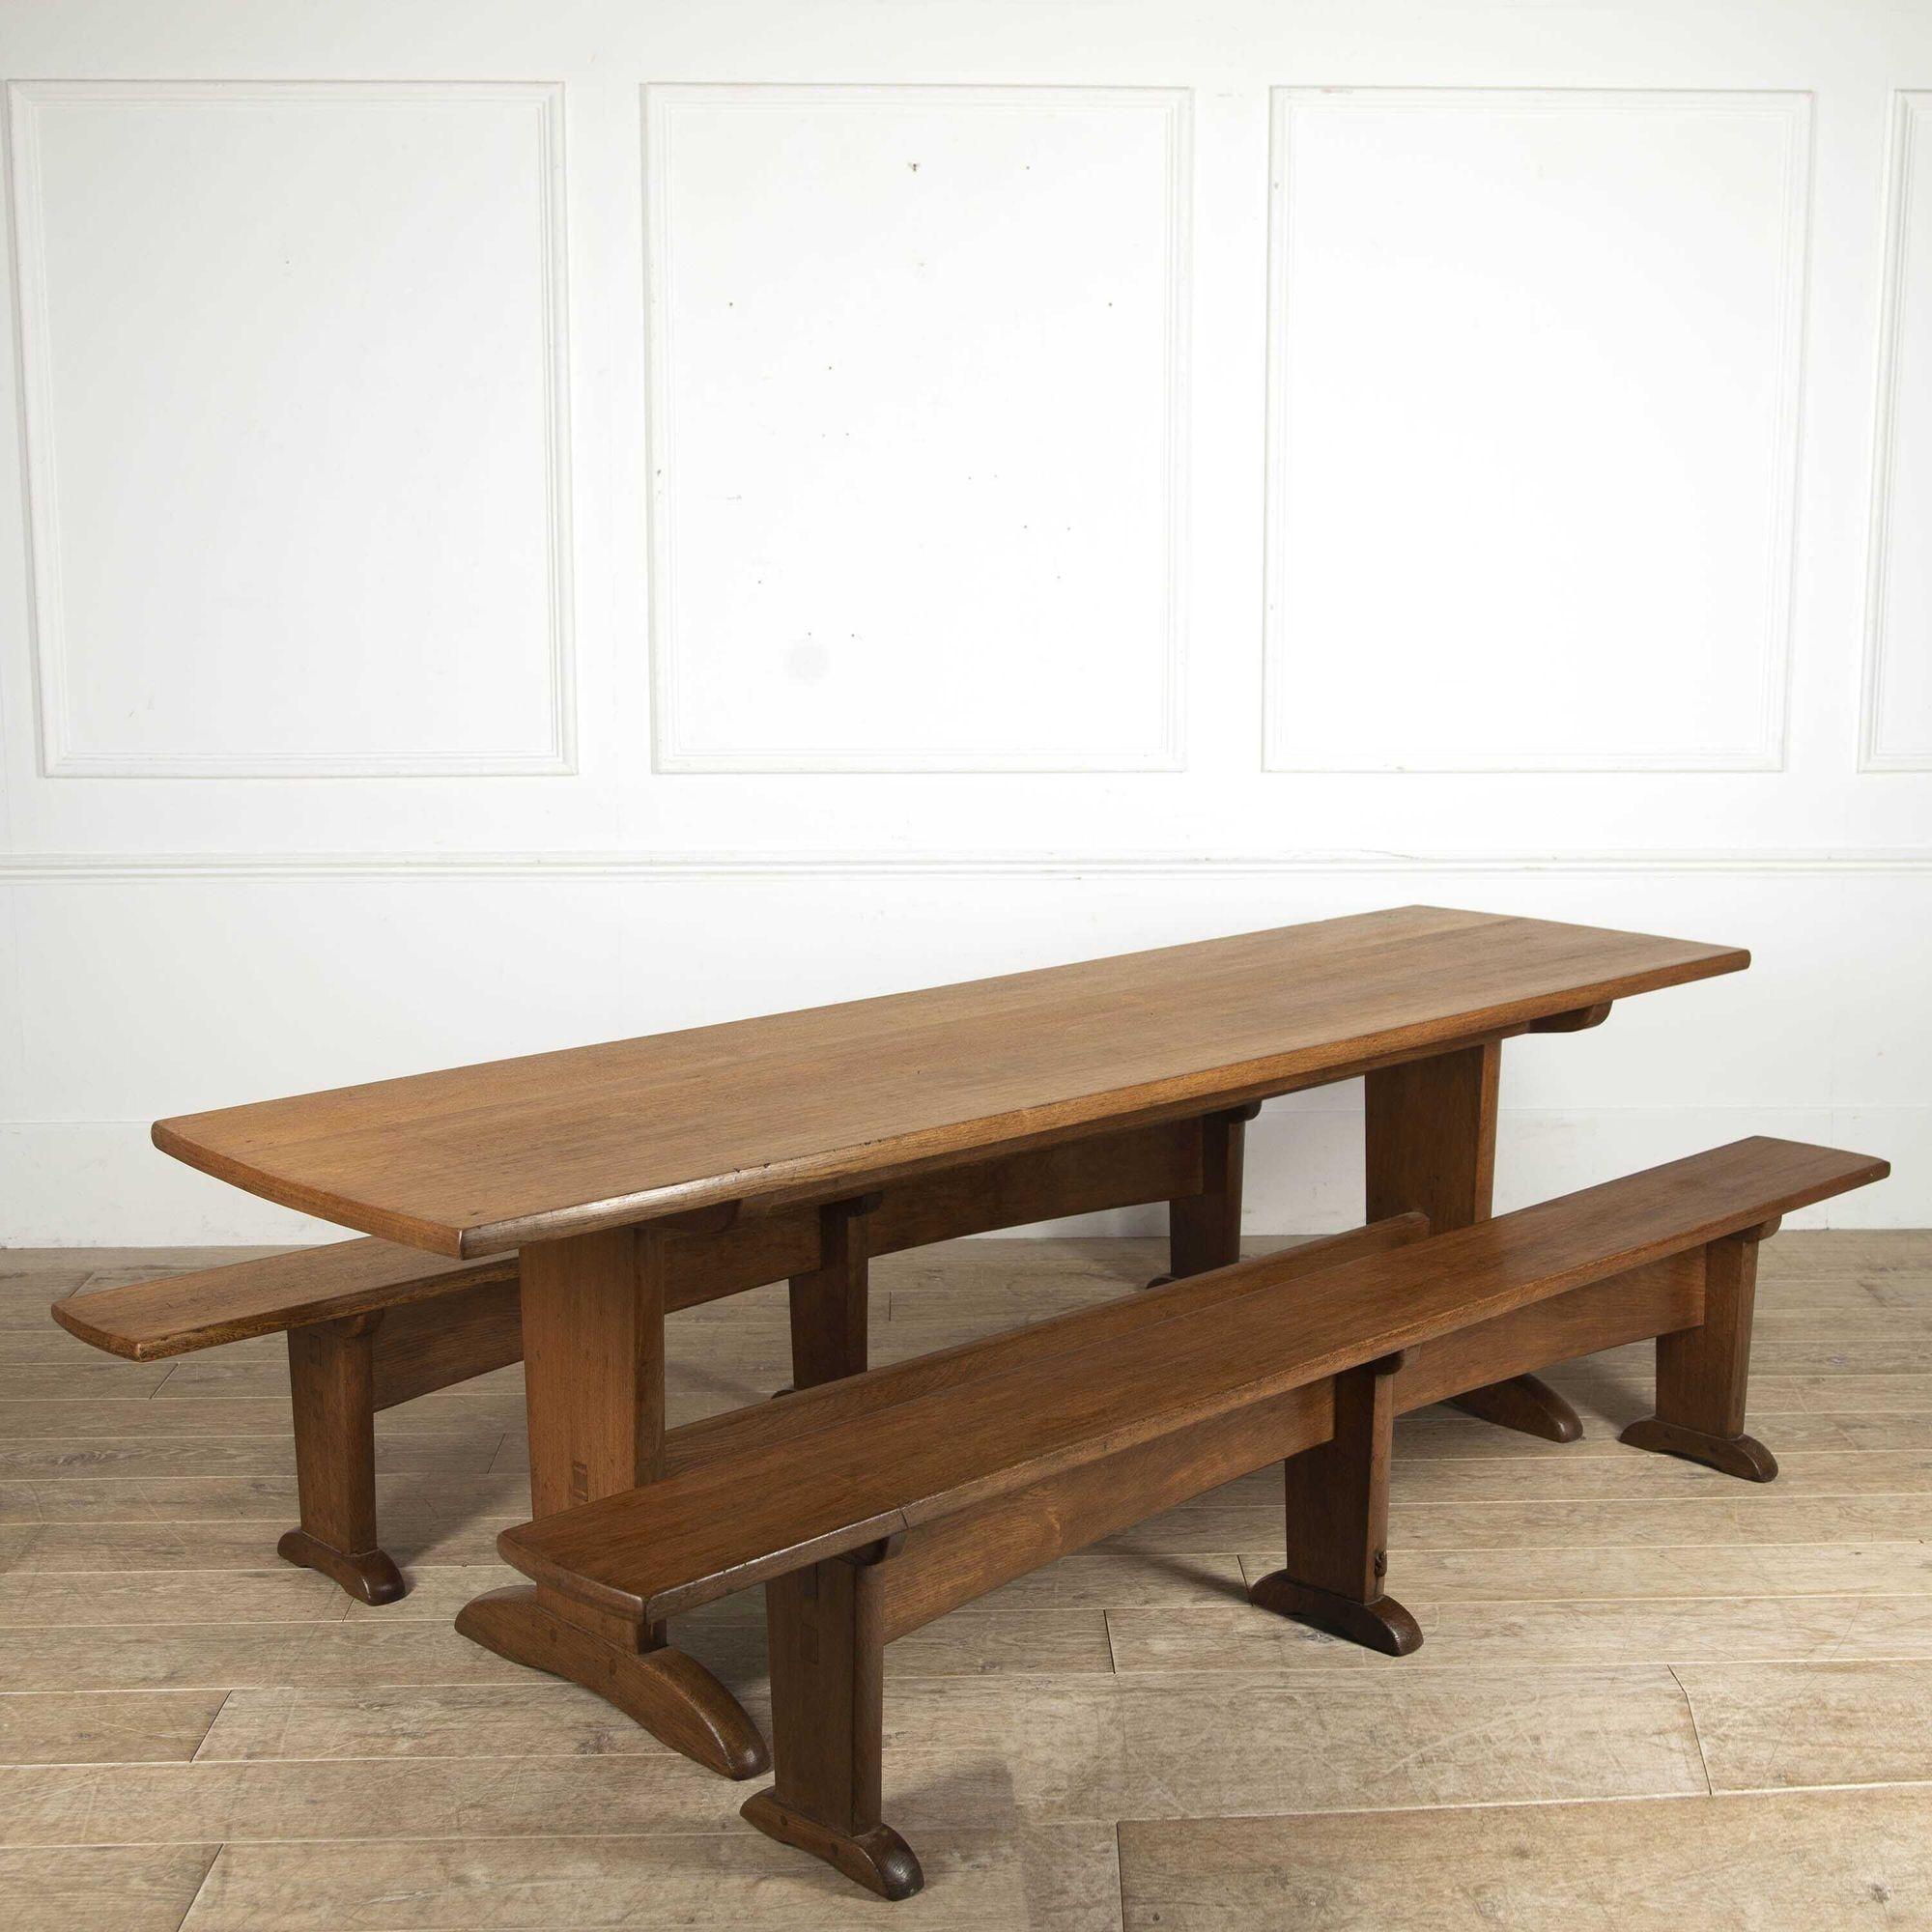 Wonderful 20th century oak table and two benches.
This lovely set was made by Colin 